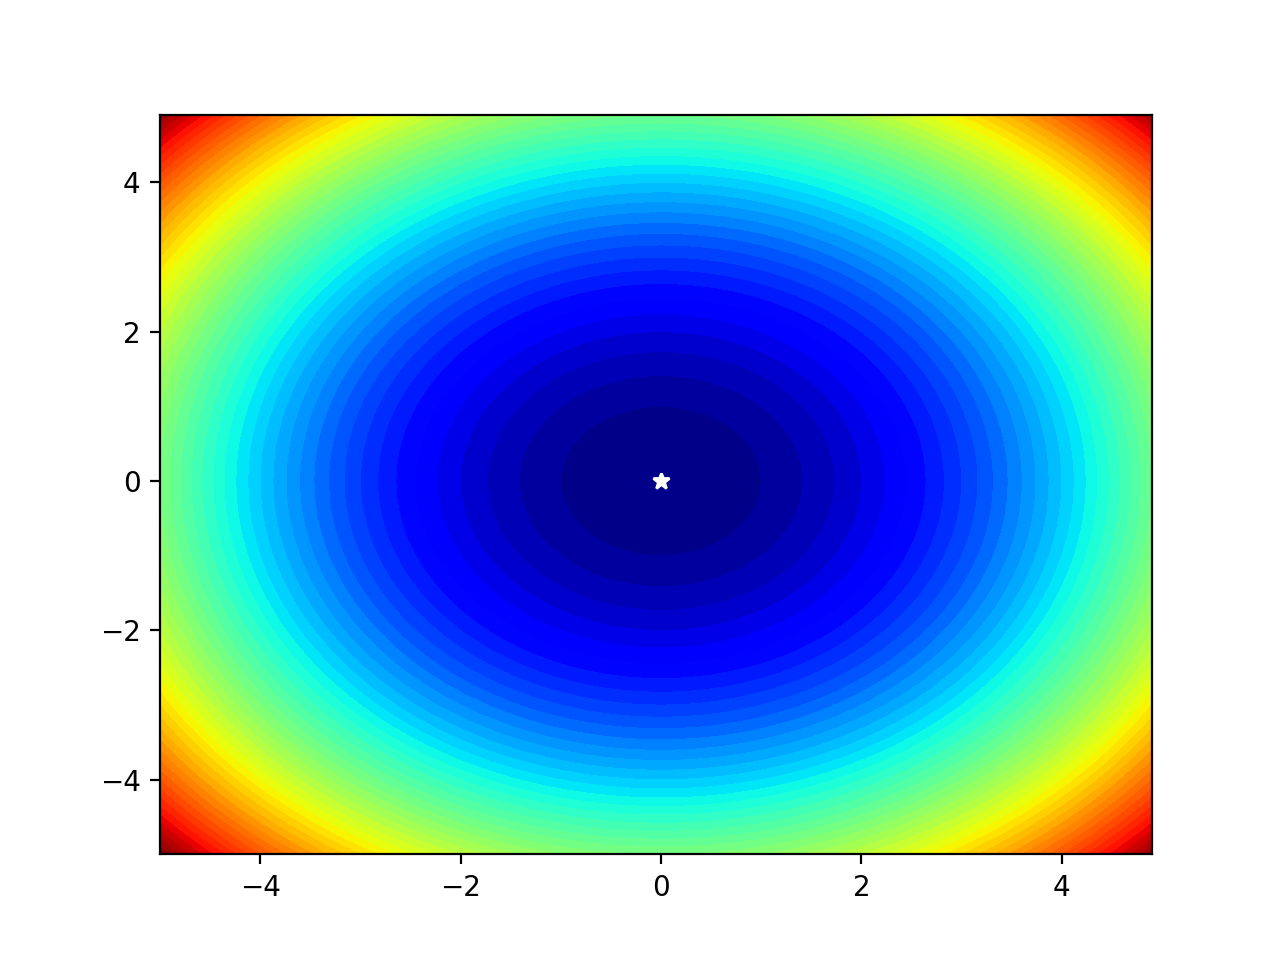 Filled Contour Plot of a Two-Dimensional Objective Function With Optima Marked by a White Star